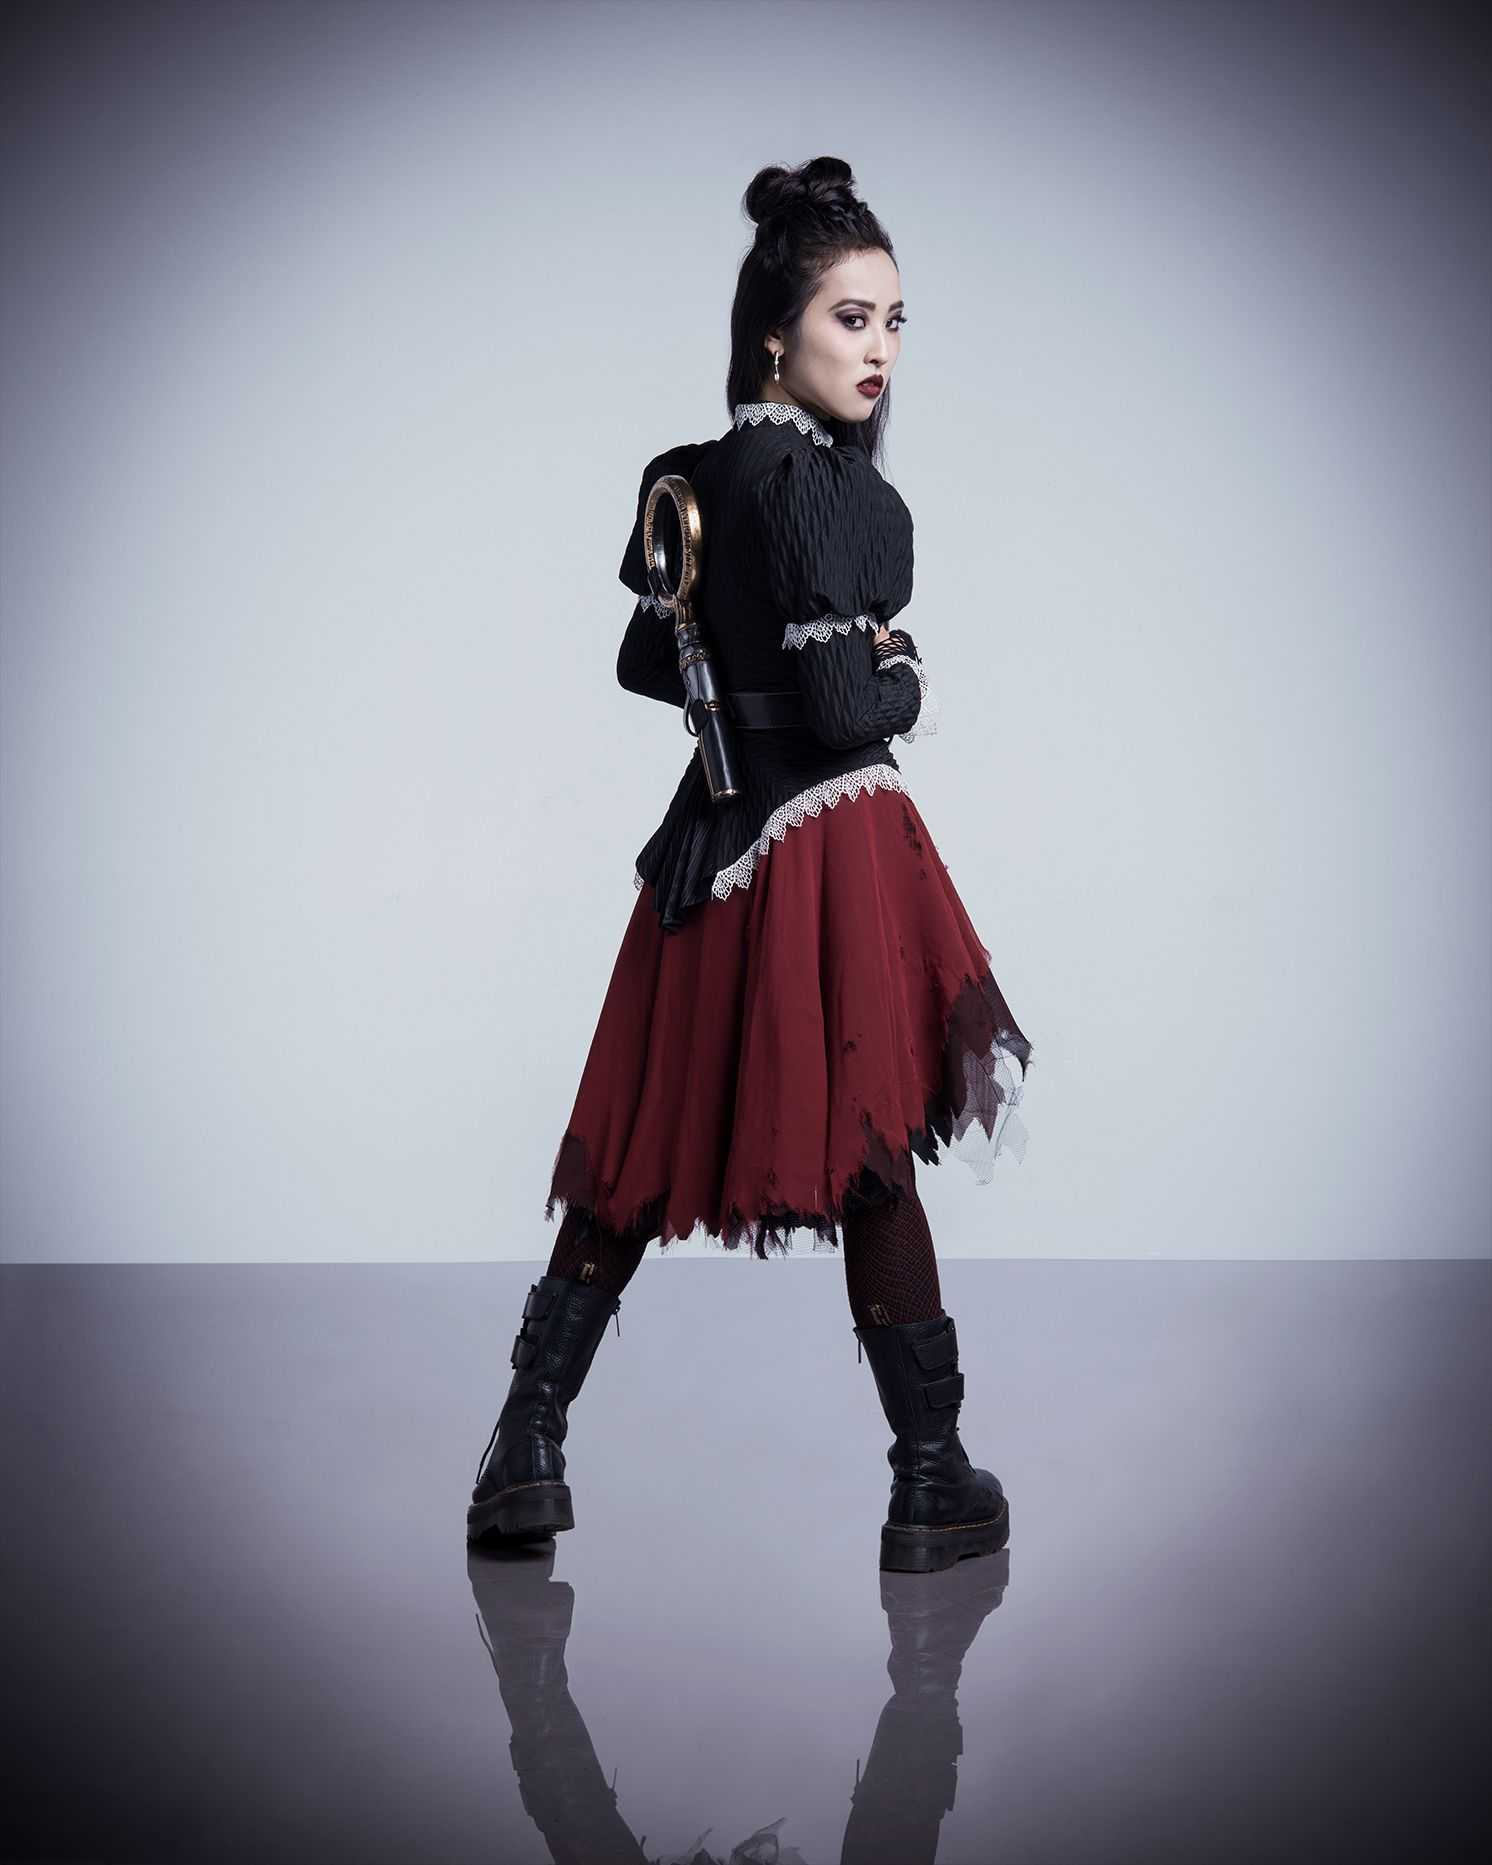 41 Hot Pictures Of Nico Minoru That Will Make You Begin To Look All Starry Eyed At Her 540